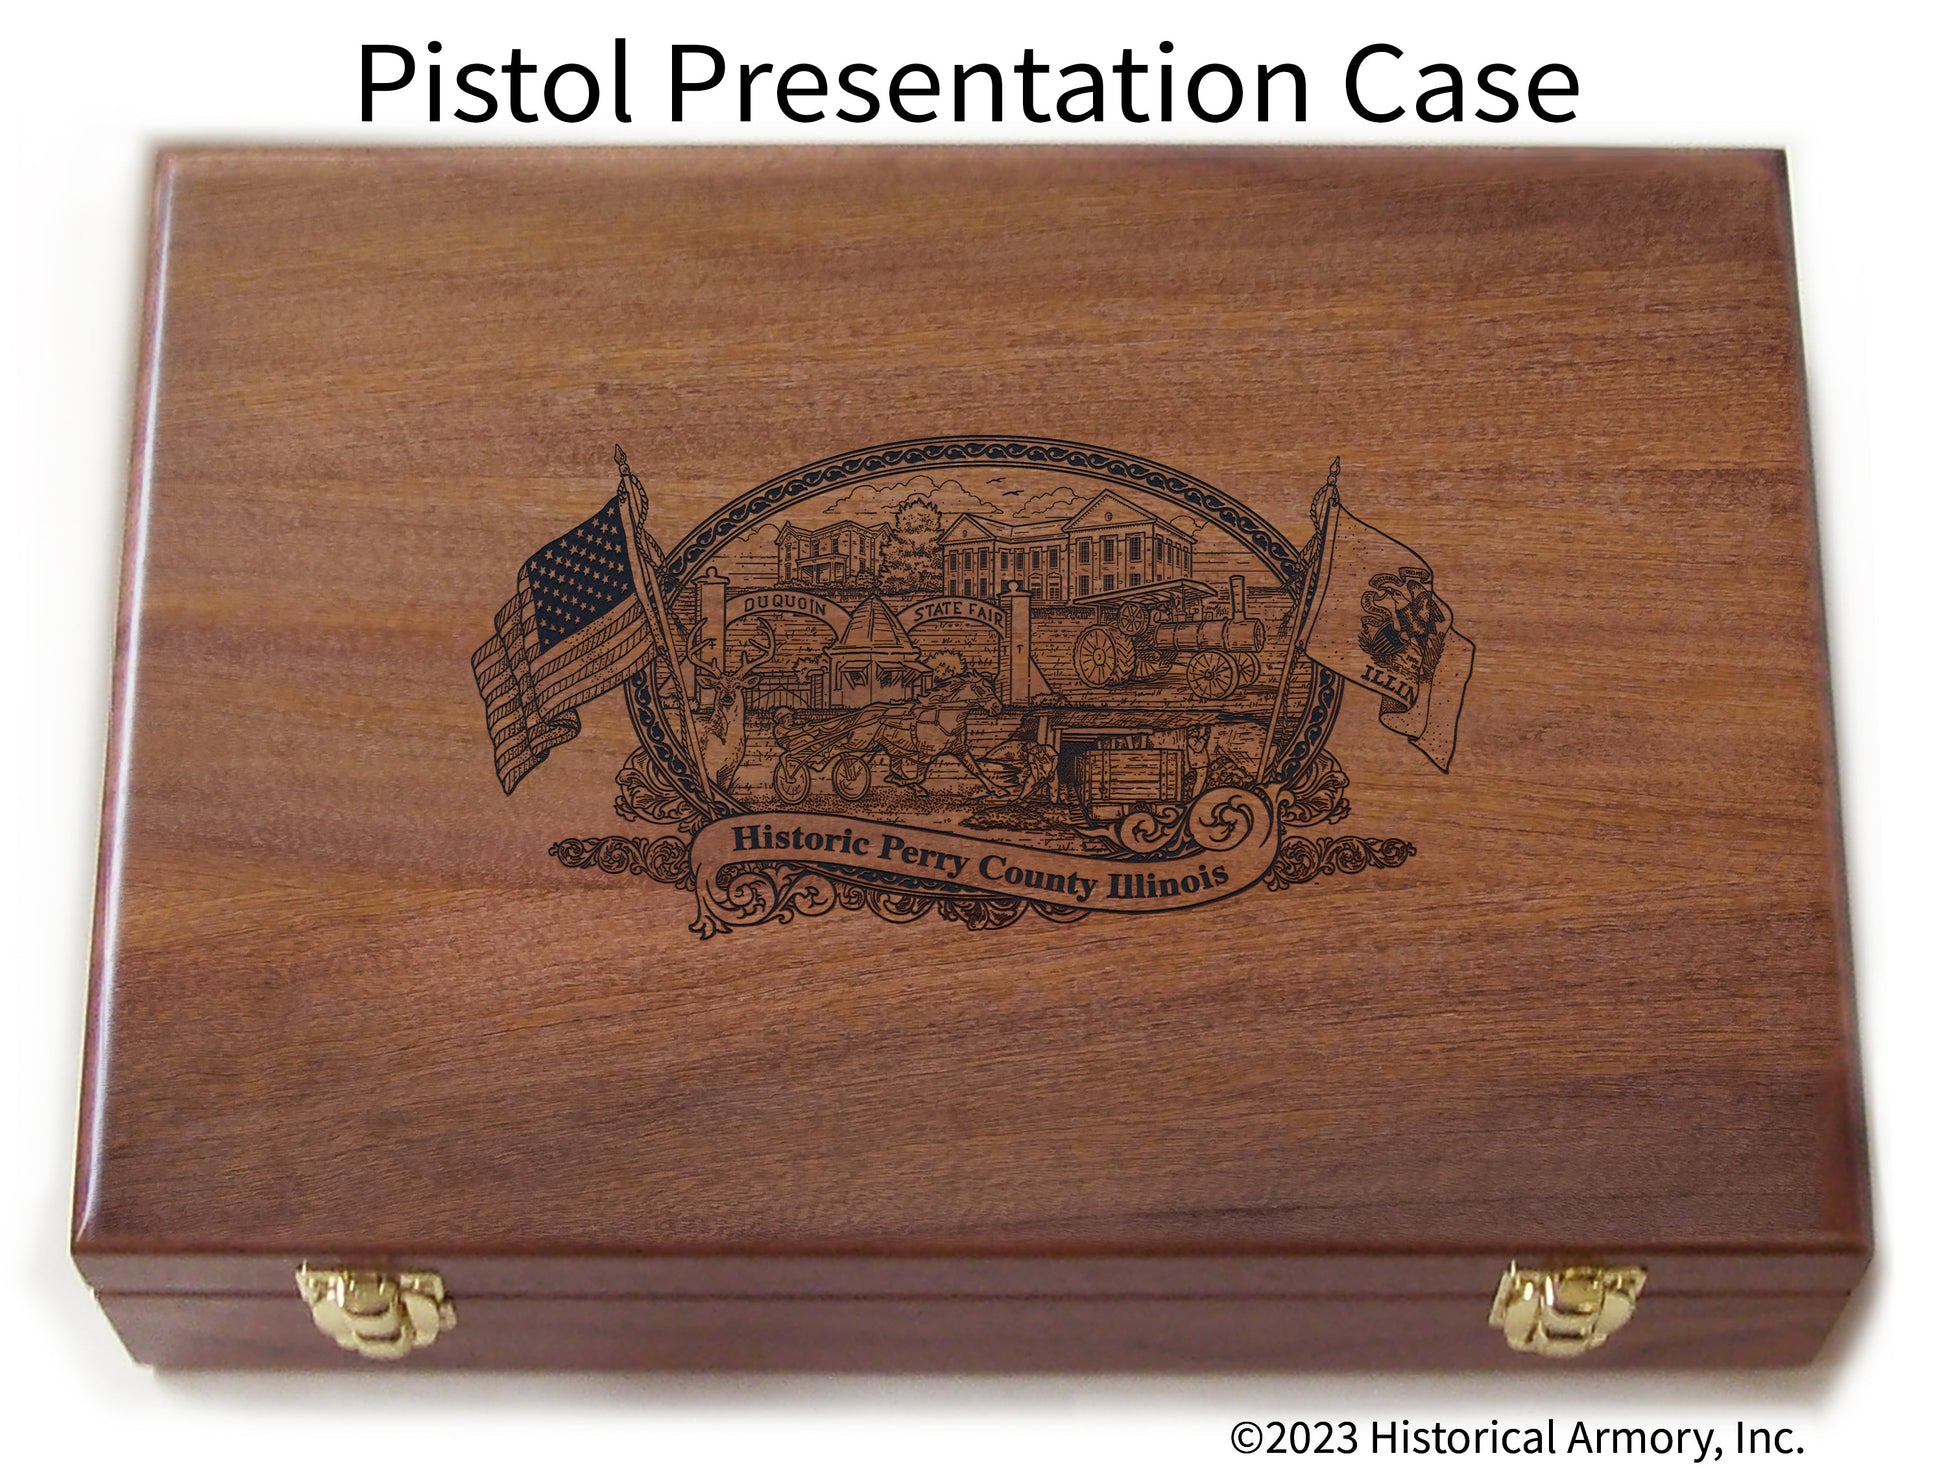 Perry County Illinois Engraved .45 Auto Ruger 1911 Presentation Case